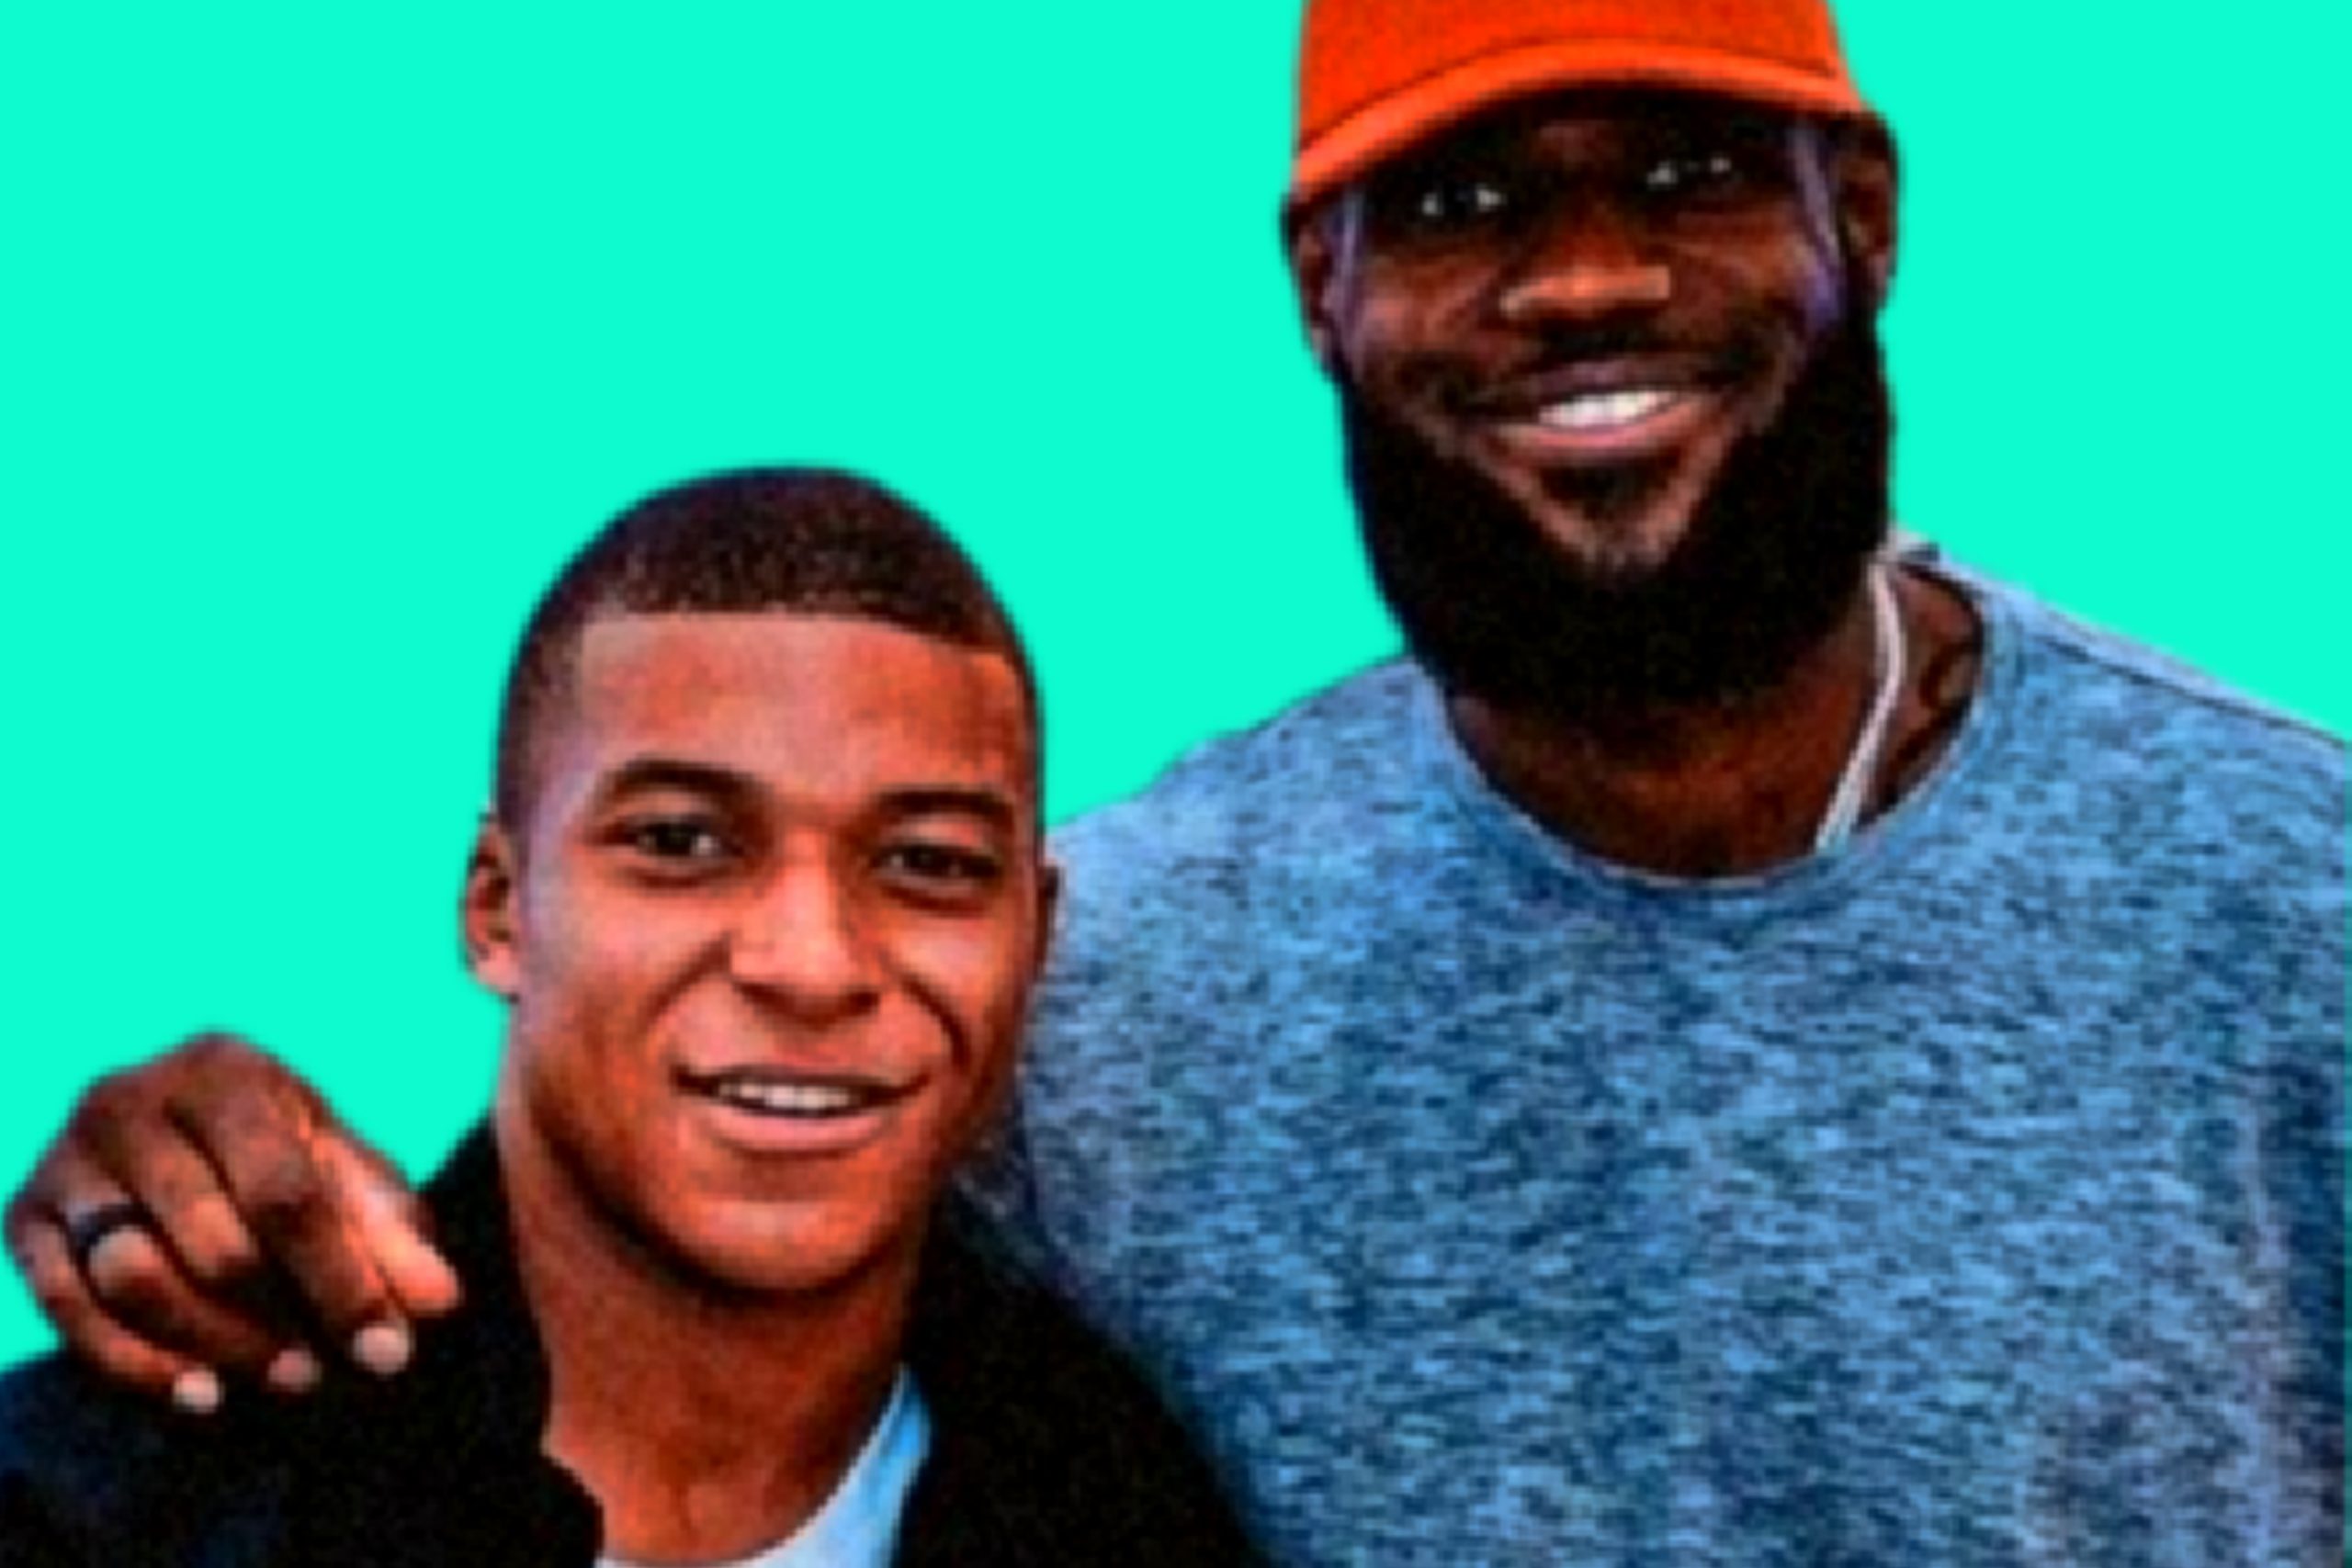 Here’s why LeBron James and Kylian Mbappe have swapped profile pictures on Instagram